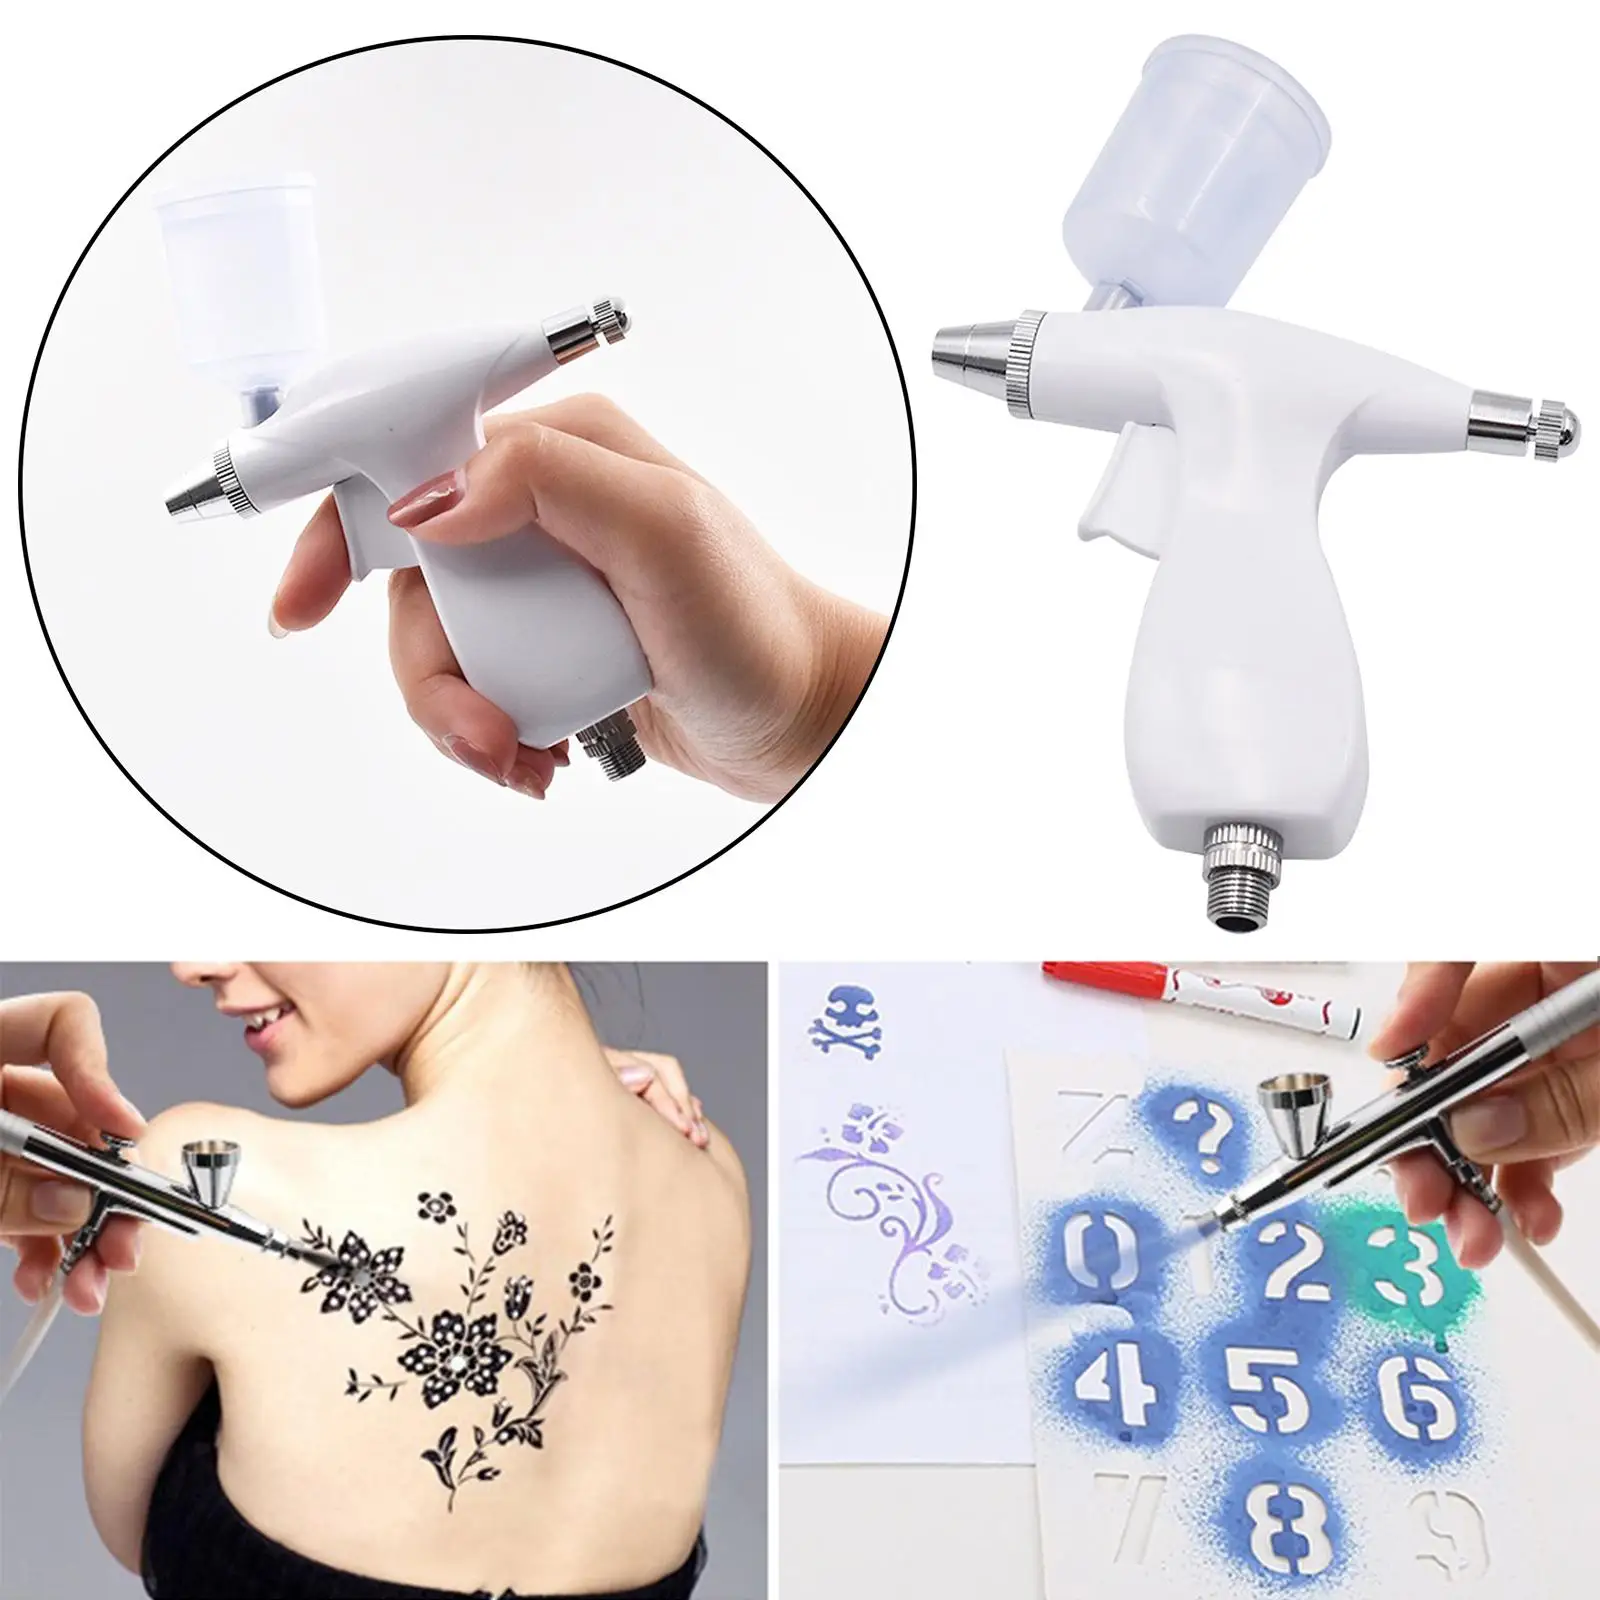 Handheld Airbrush Spray Gun 20ml Capacity 0.4mm Nozzle 1/8 Connector Airbrush Nozzle for Makeup Manicure Model Painting Nail Art